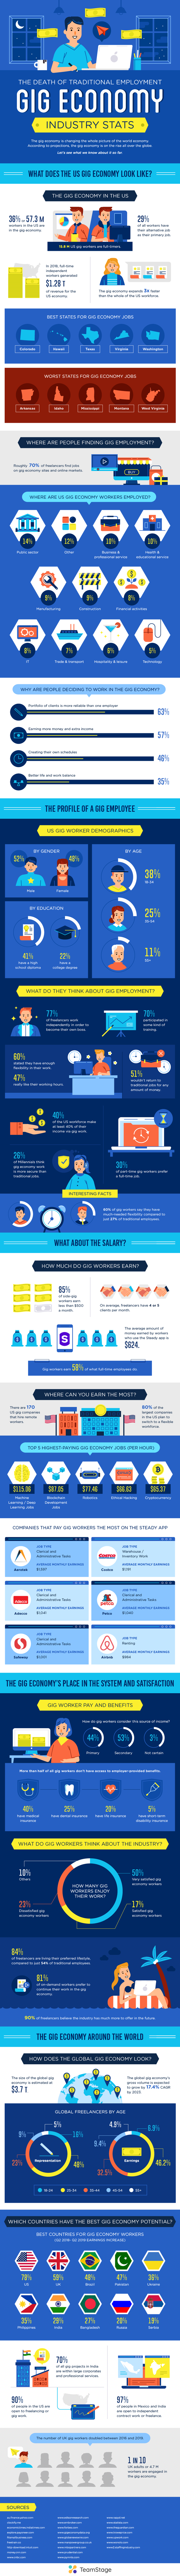 Gearing Up for an Expanding Gig Economy [Infographic]